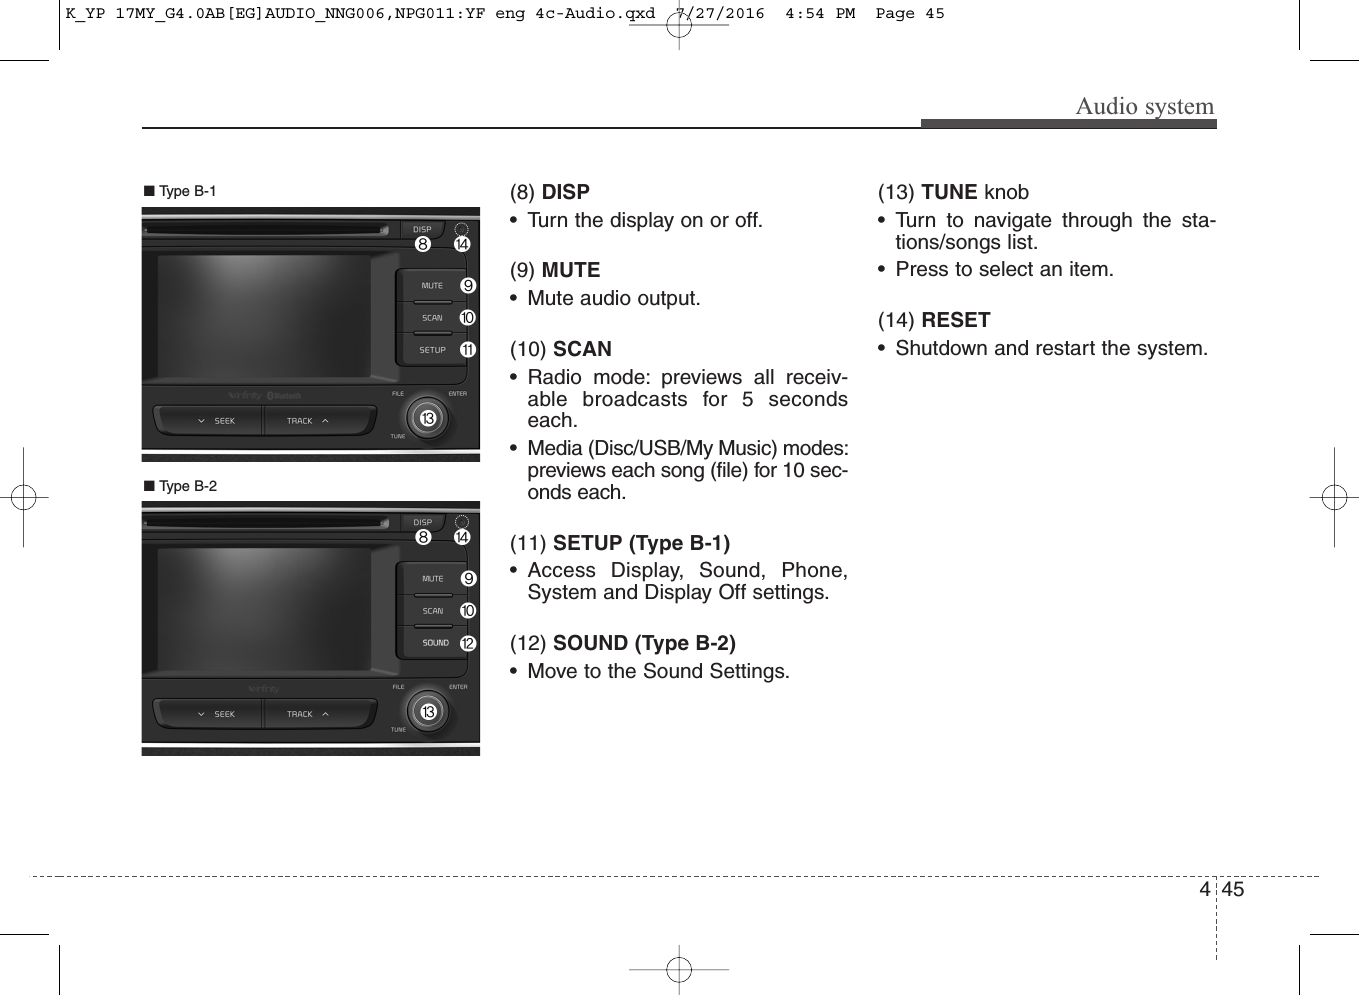 Audio system(8) DISP• Turn the display on or off.(9) MUTE• Mute audio output.(10) SCAN• Radio mode: previews all receiv-able broadcasts for 5 secondseach.• Media (Disc/USB/My Music) modes:previews each song (file) for 10 sec-onds each.(11) SETUP (Type B-1)• Access Display, Sound, Phone,System and Display Off settings.(12) SOUND (Type B-2)• Move to the Sound Settings.(13) TUNE knob • Turn to navigate through the sta-tions/songs list.• Press to select an item.(14) RESET• Shutdown and restart the system.■ Type B-2■ Type B-1454K_YP 17MY_G4.0AB[EG]AUDIO_NNG006,NPG011:YF eng 4c-Audio.qxd  7/27/2016  4:54 PM  Page 45